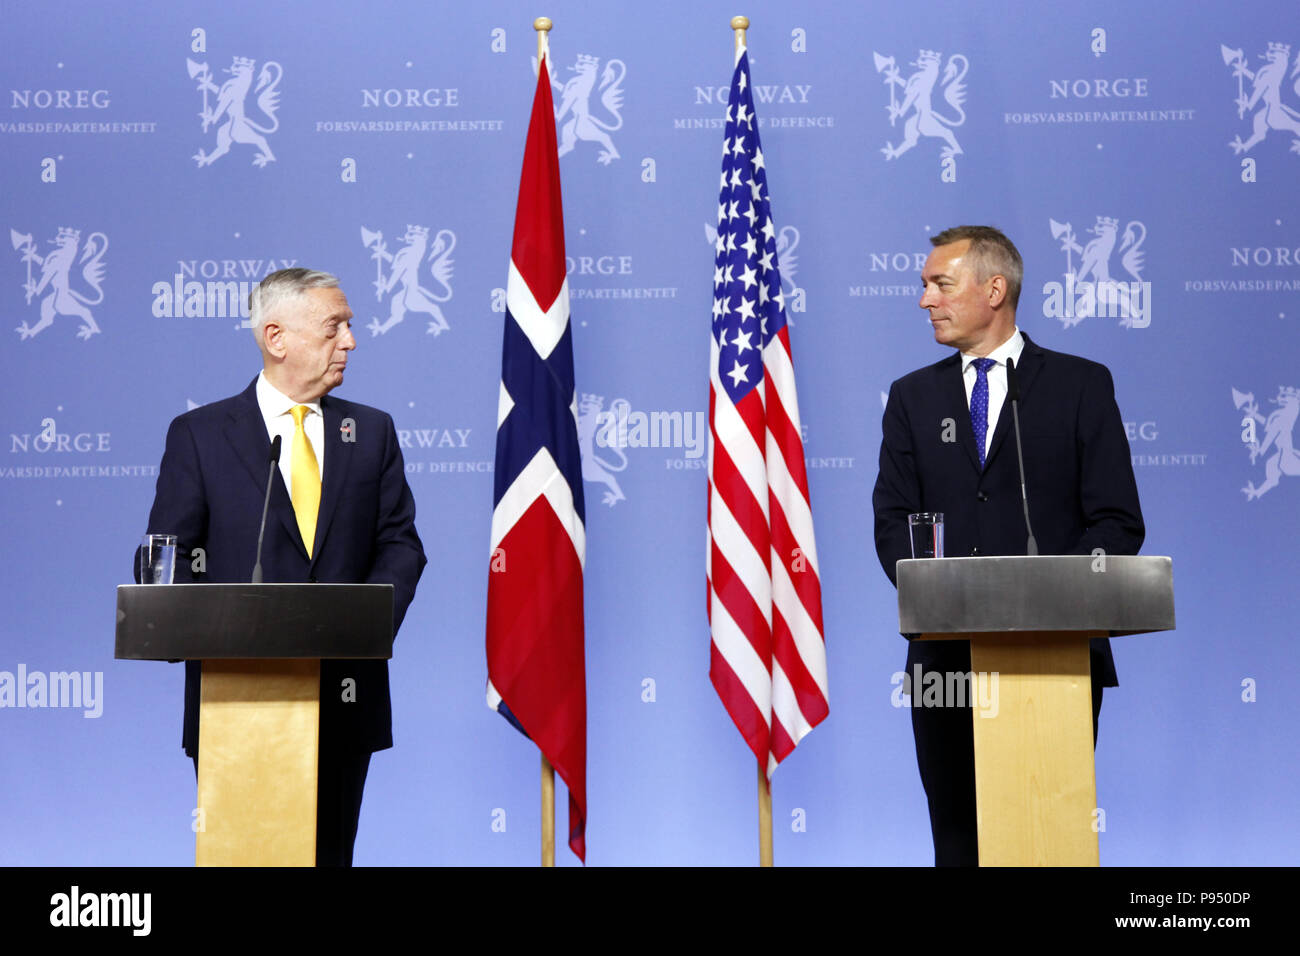 Oslo, Norway. 14th July, 2018. U.S. Secretary of Defense James Mattis (L) attends a joint press conference with Norwegian Minister of Defence Frank Bakke-Jensen in Oslo, Norway, July 14, 2018. Norway on Saturday reconfirmed its commitment to gradually increase defense spending to two percent of GDP in the North Atlantic Treaty Organization (NATO) during a visit by U.S. Secretary of Defense James Mattis to the Nordic country. Credit: Liang Youchang/Xinhua/Alamy Live News Stock Photo